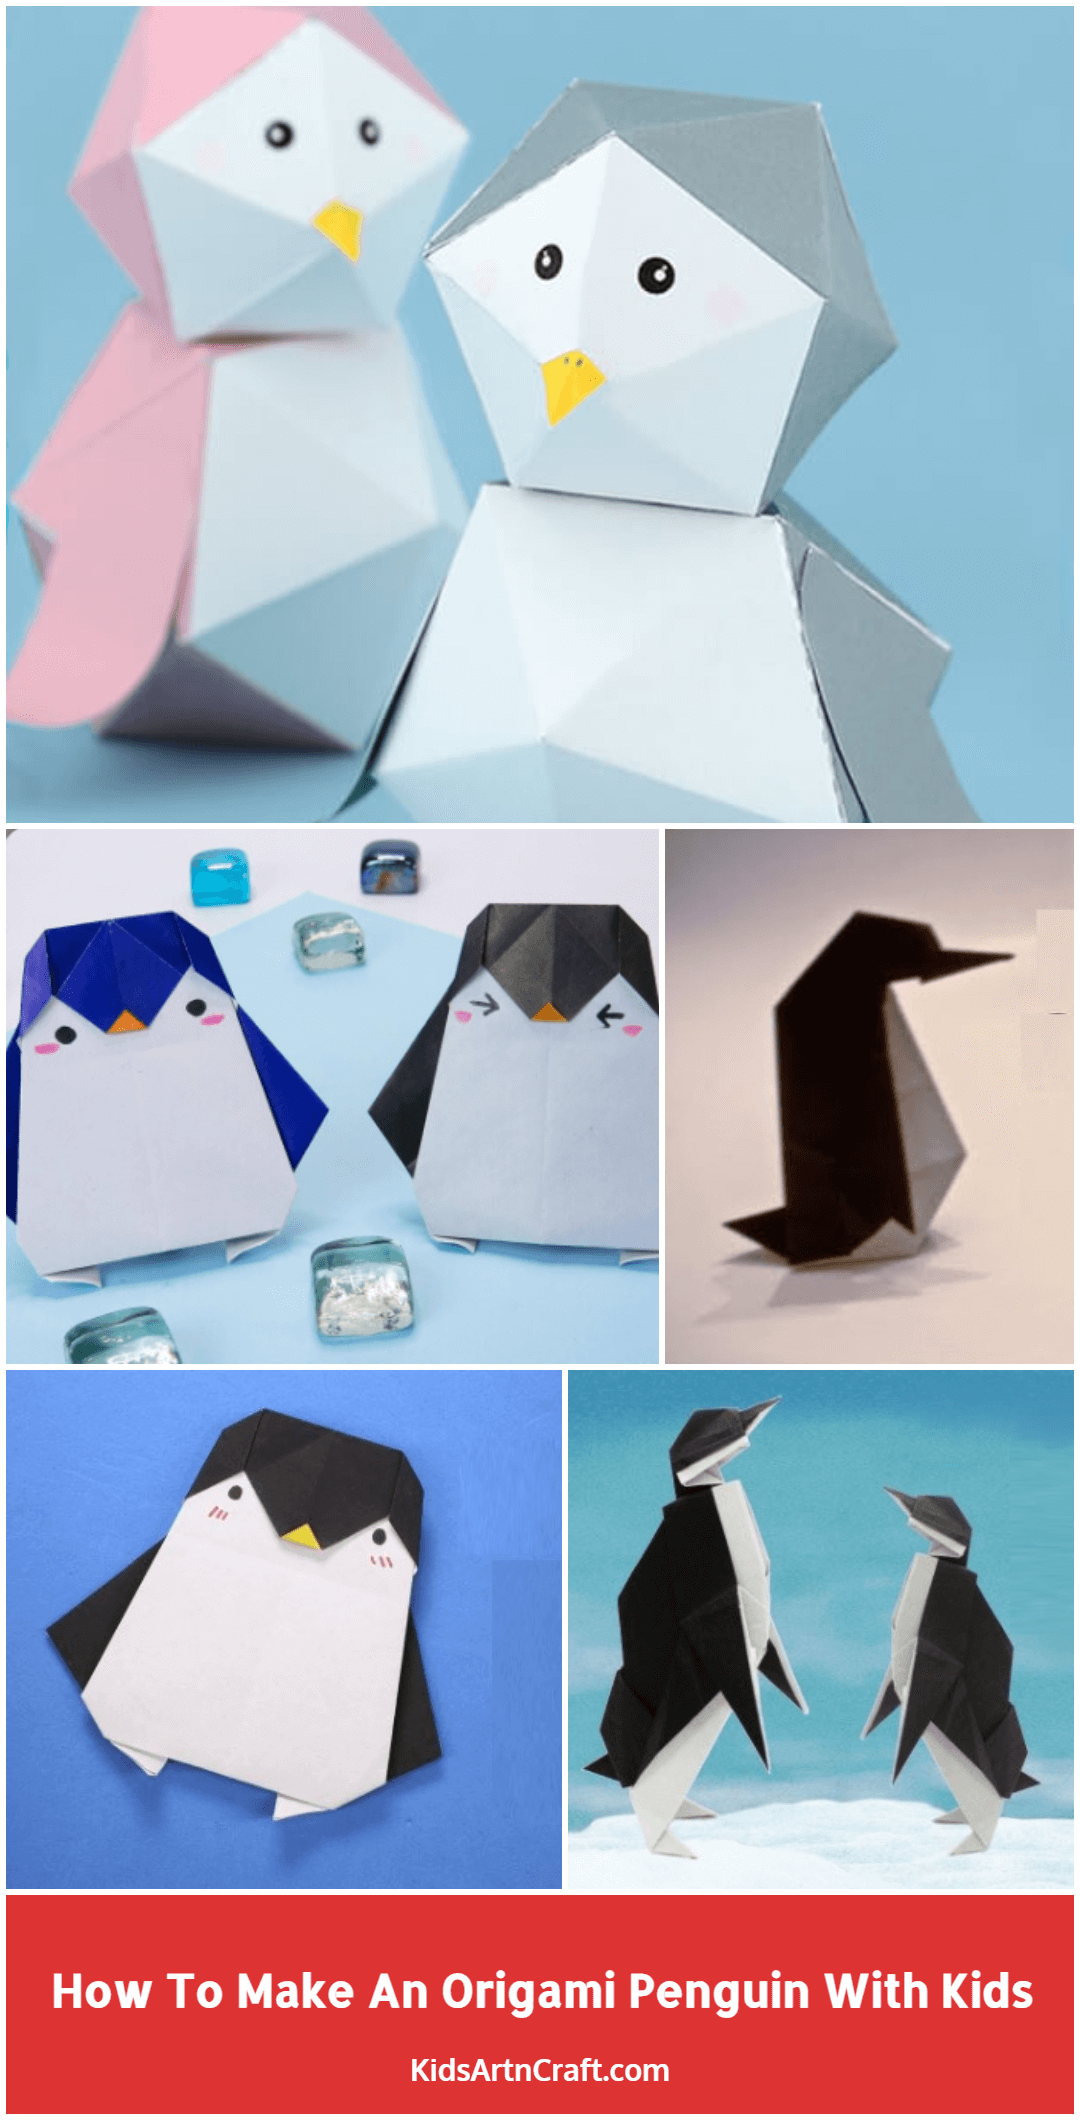 How To Make An Origami Penguin With Kids